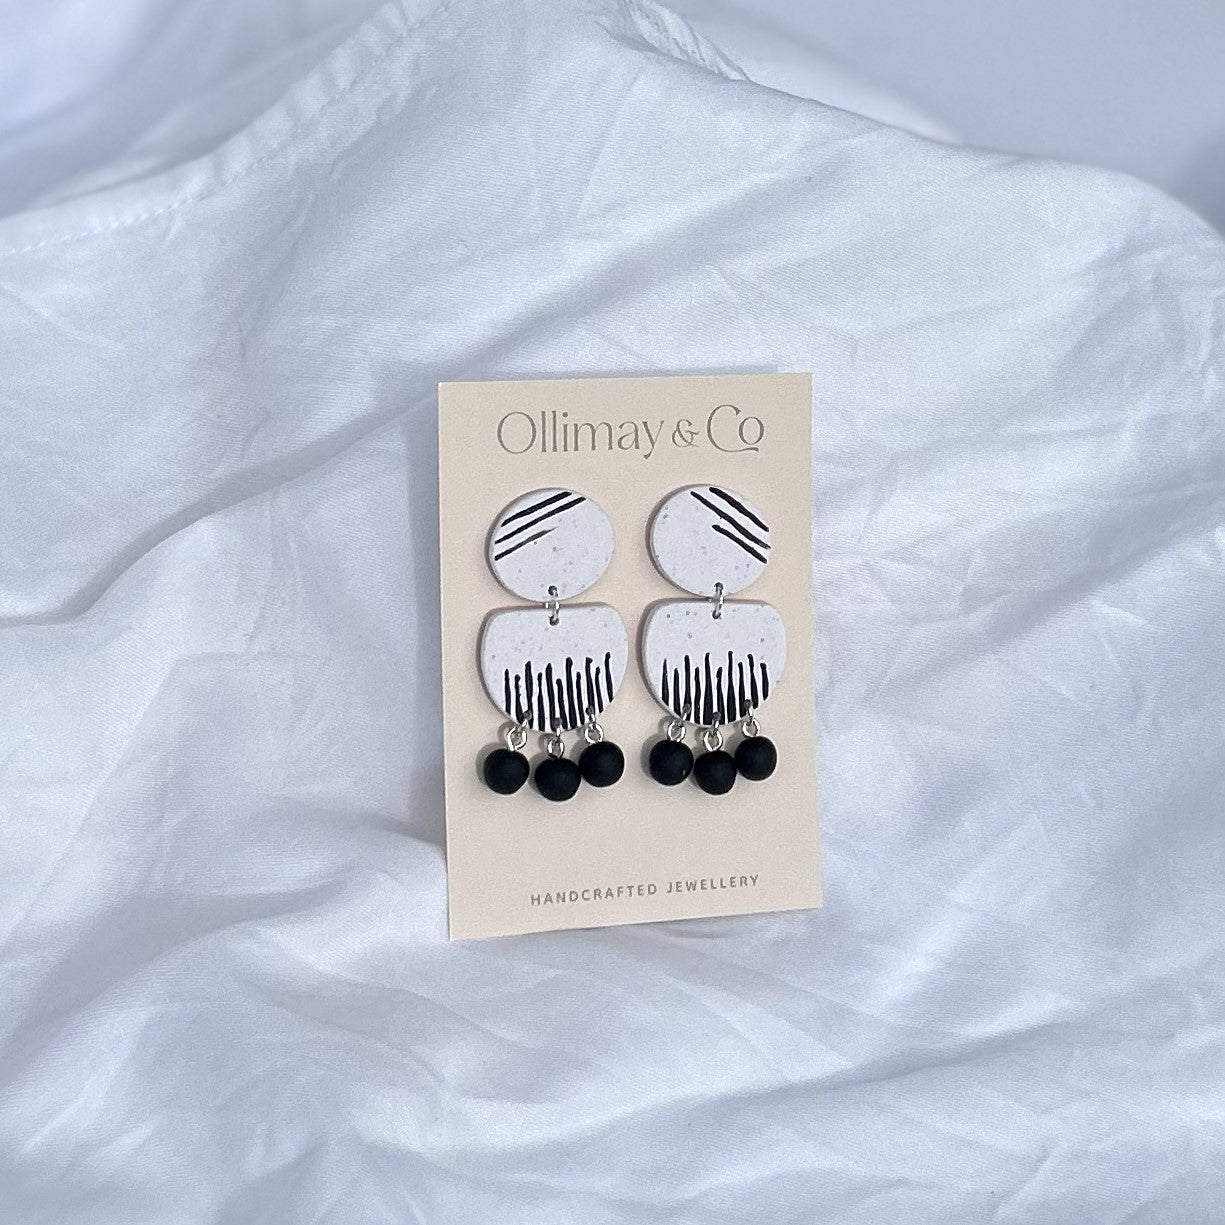 Hand painted dangle black and white earrings - Ollimay and Co